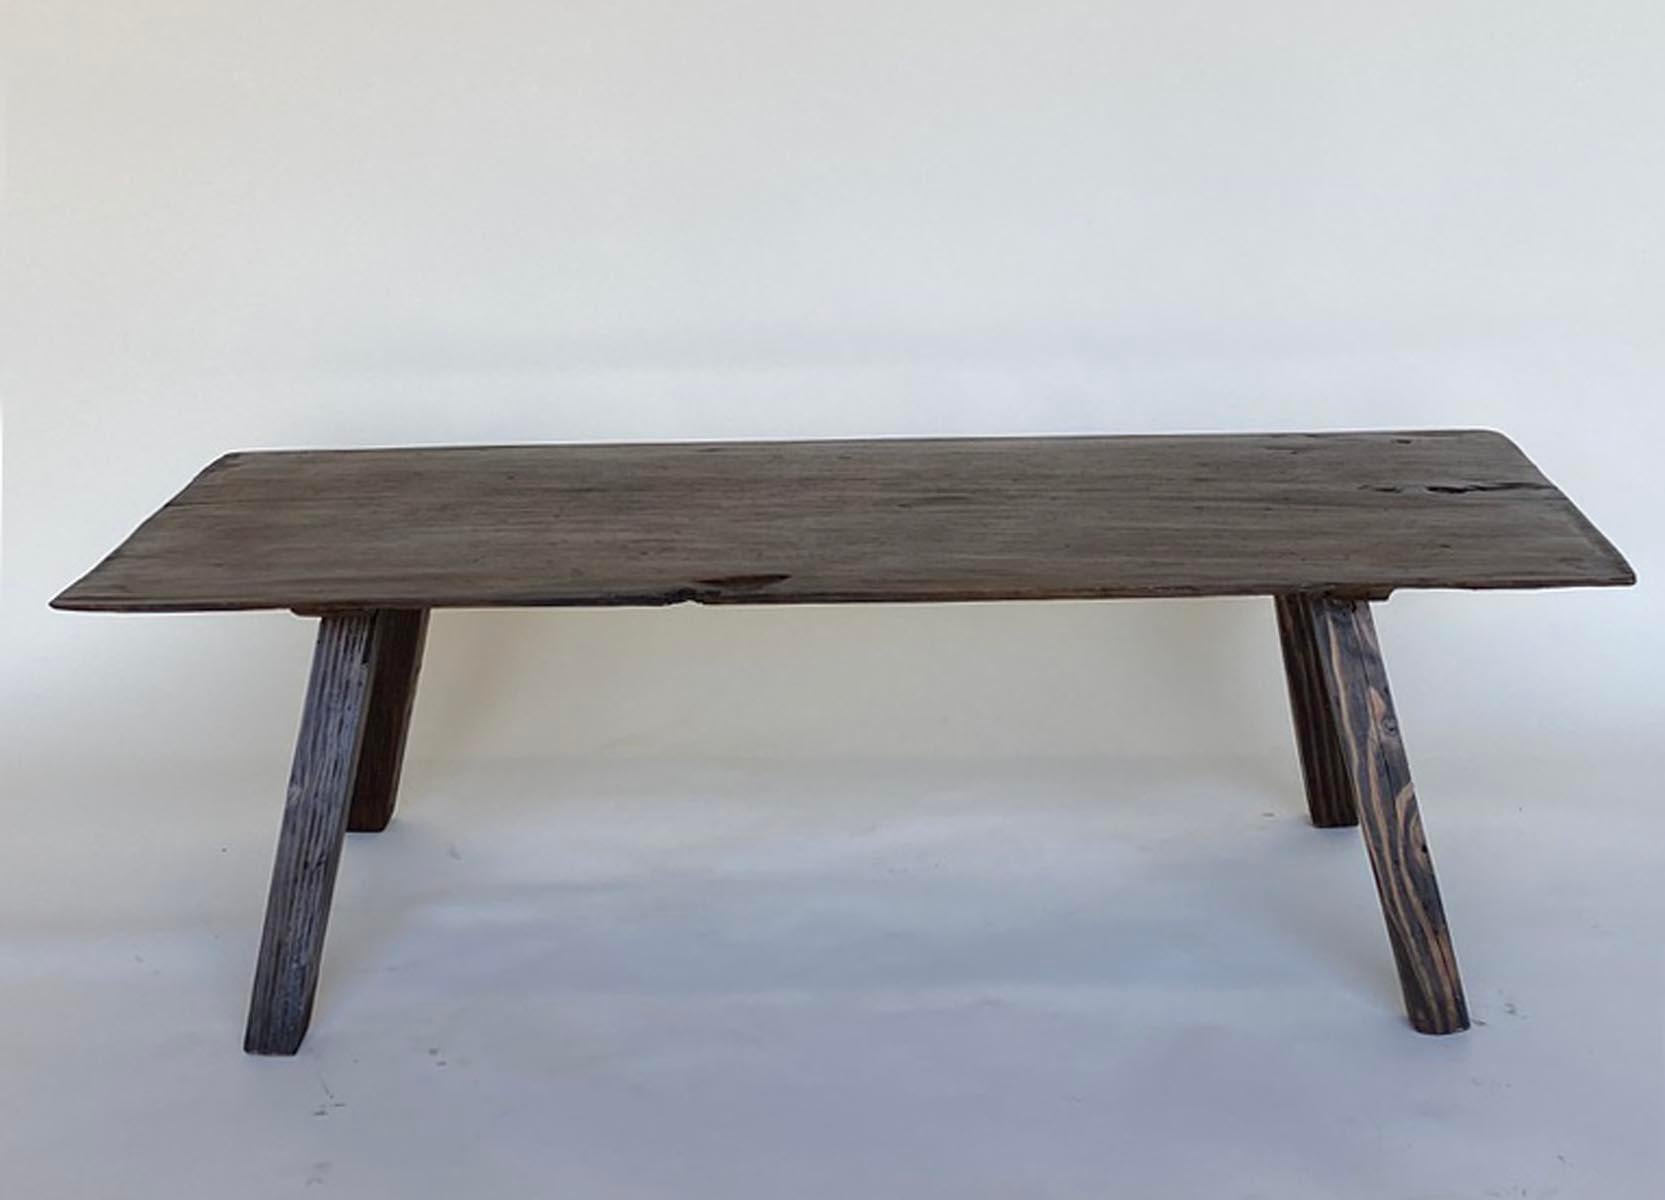 Rustic coffee table consisting of a one wide board top and newer legs. Great natural dark patina. Age appropriate wear throughout but fully functional. Please see photos.